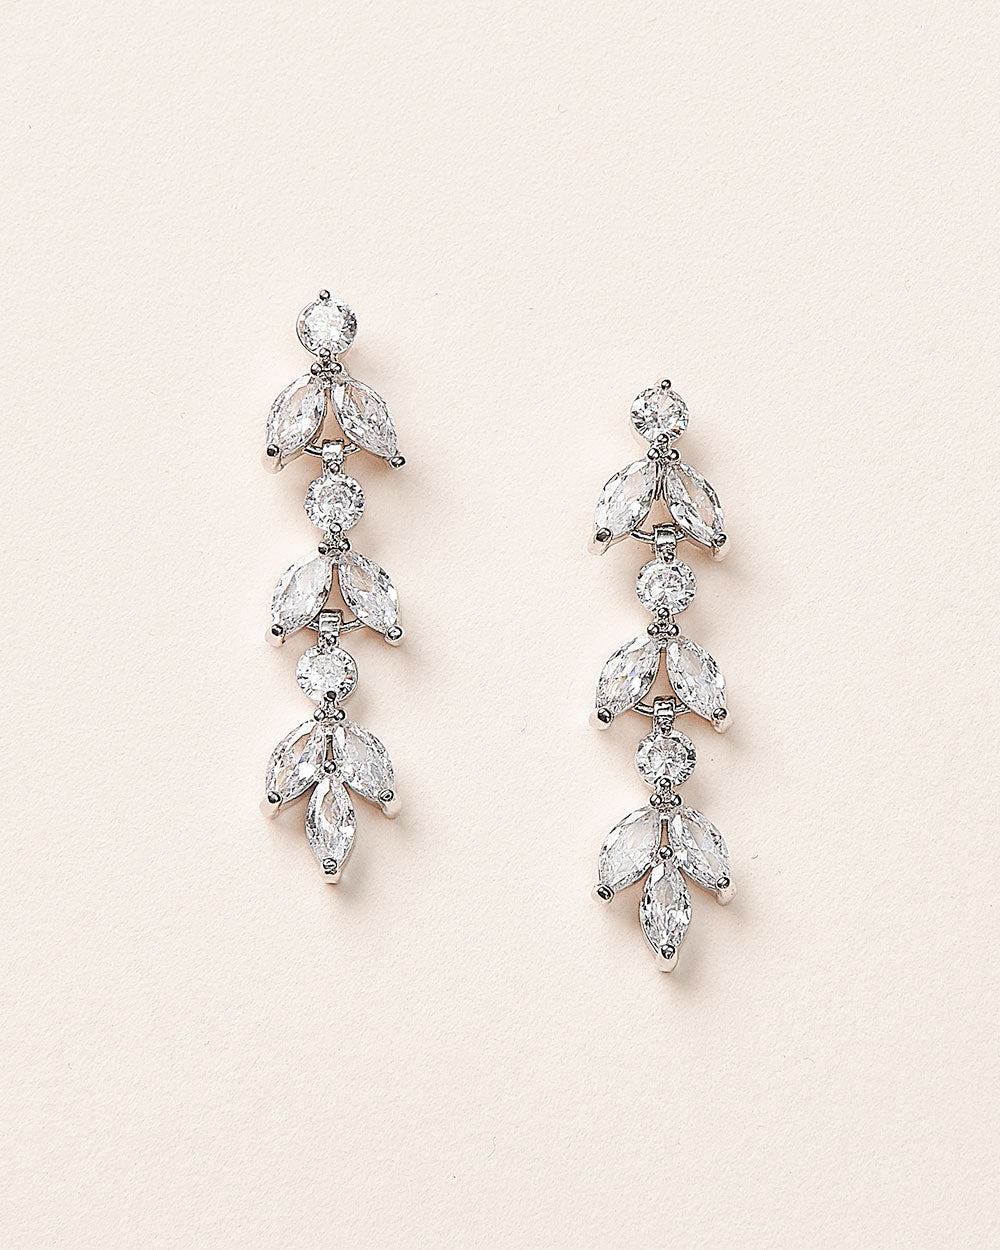 20 Statement Earrings To Wear On Your Wedding Day - Praise Wedding